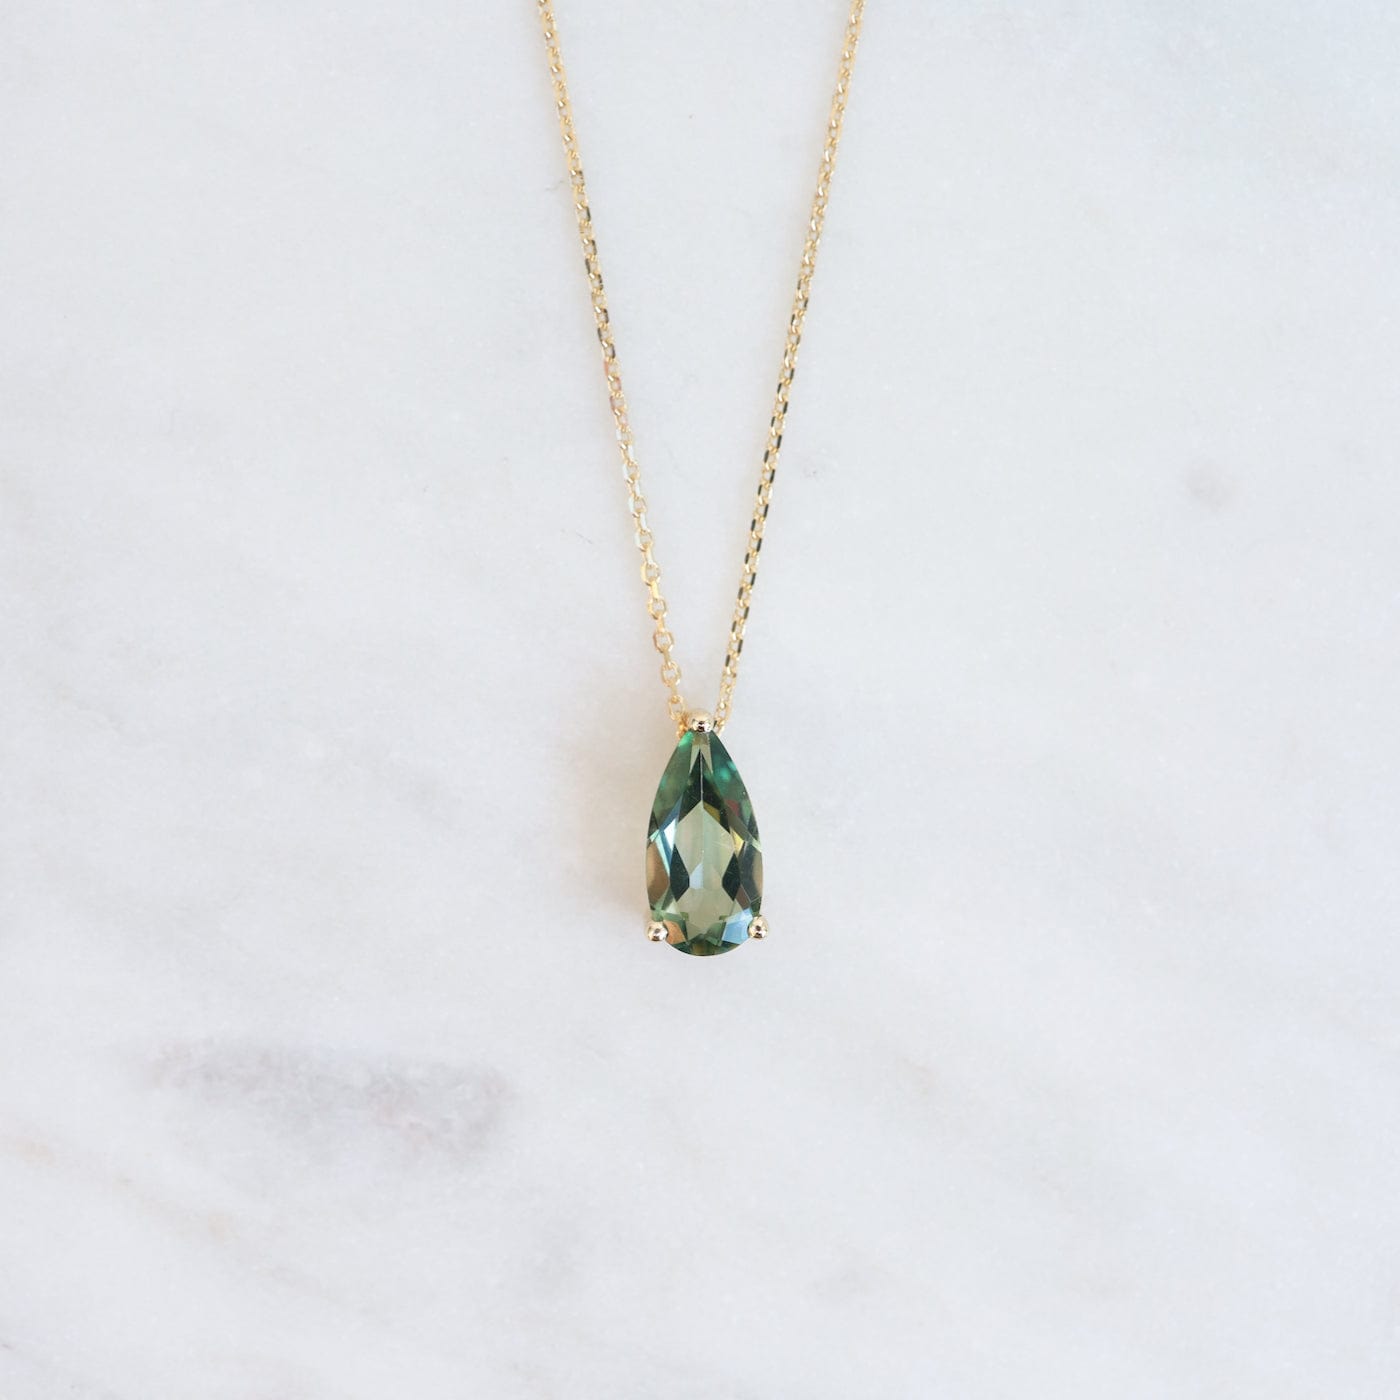 Load image into Gallery viewer, NKL-14K 14k Yellow Gold Pear Shaped Green Envy Topaz Necklace
